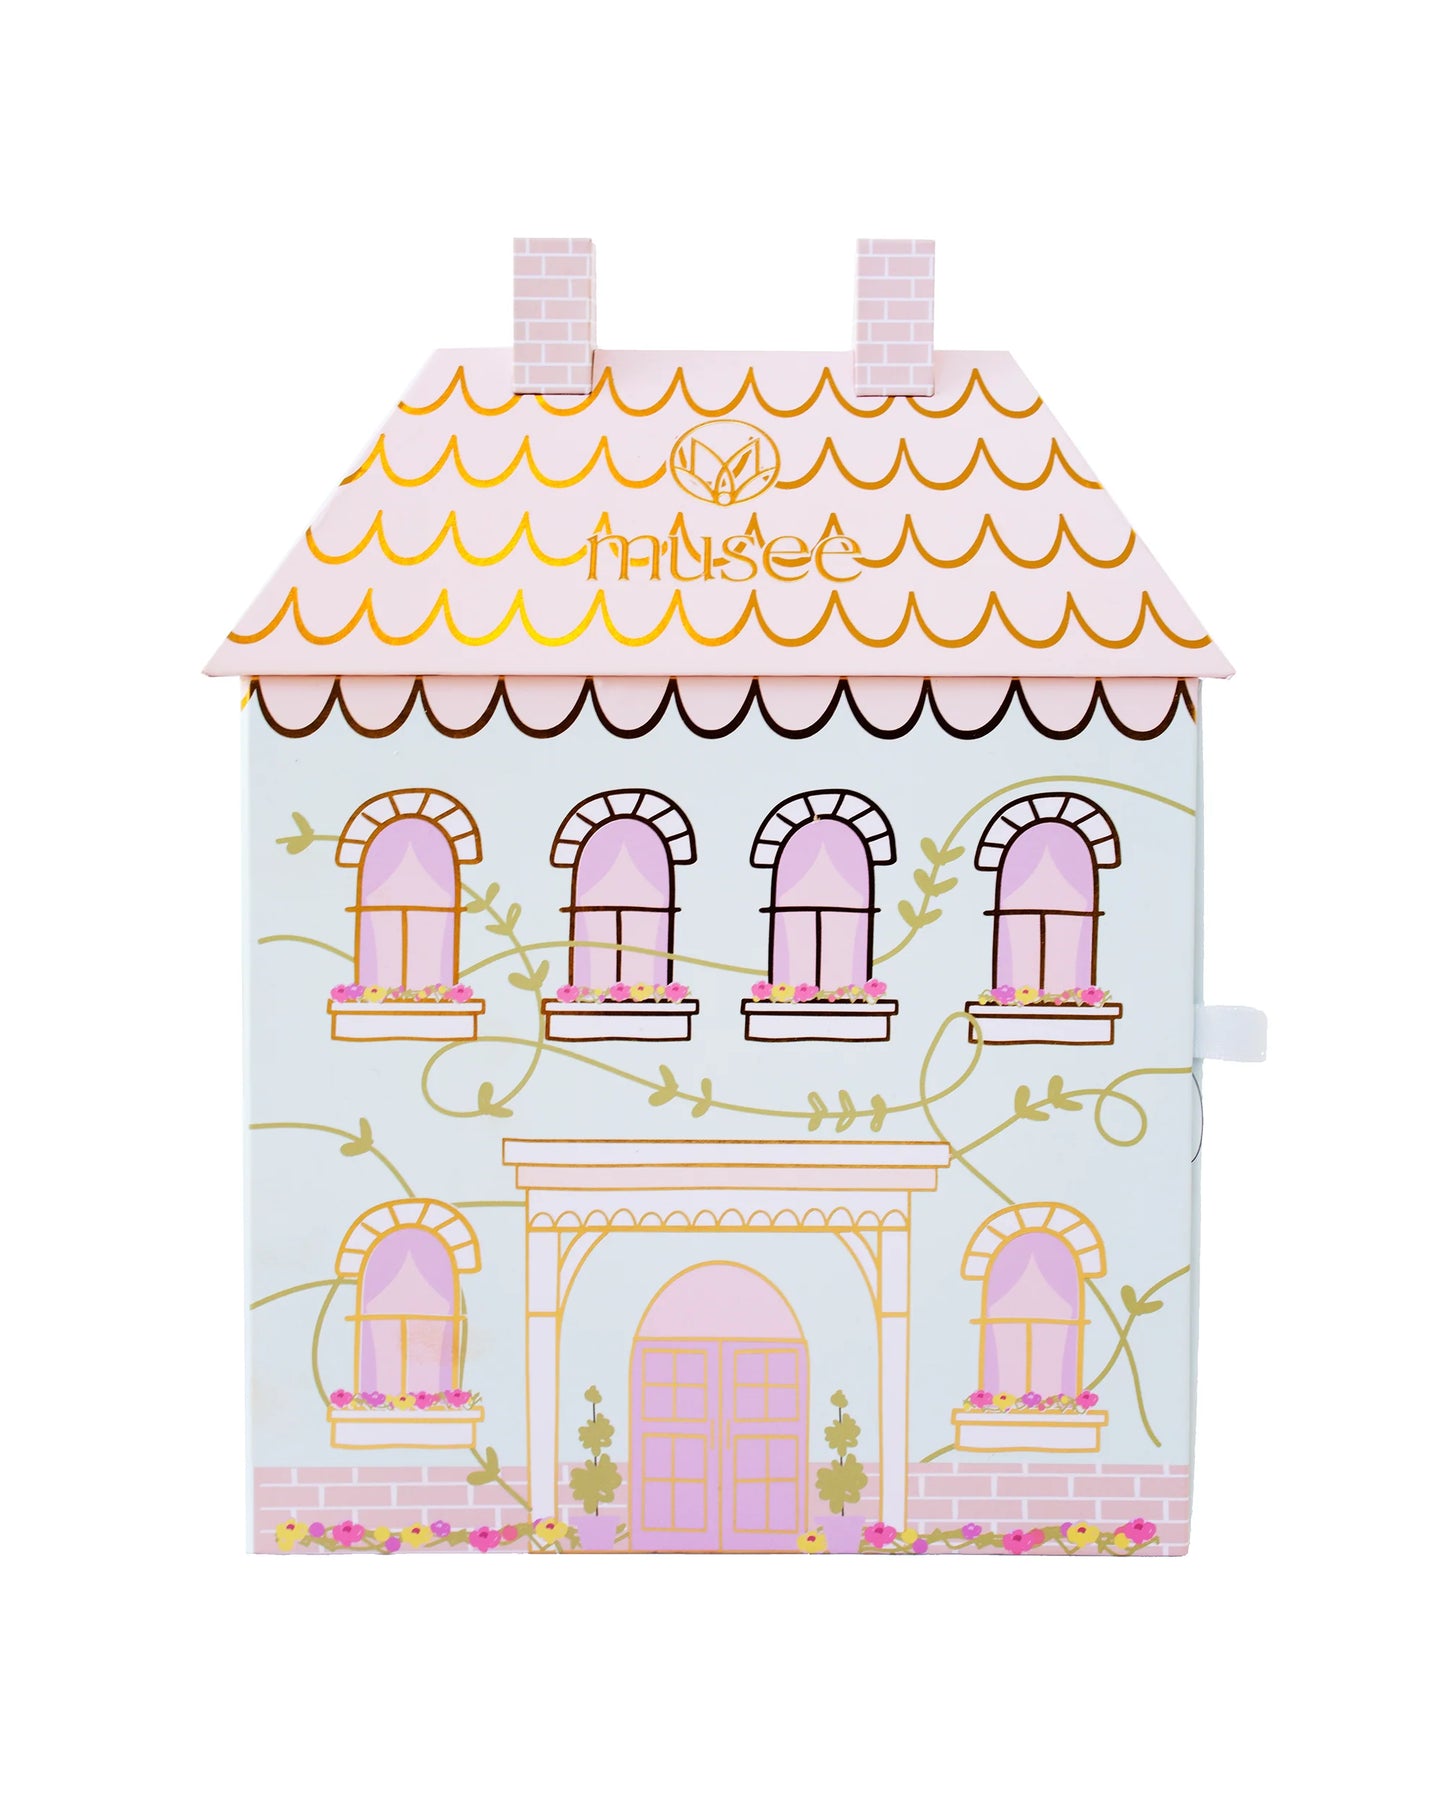 Load image into Gallery viewer, Doll House Bath Balm Set
